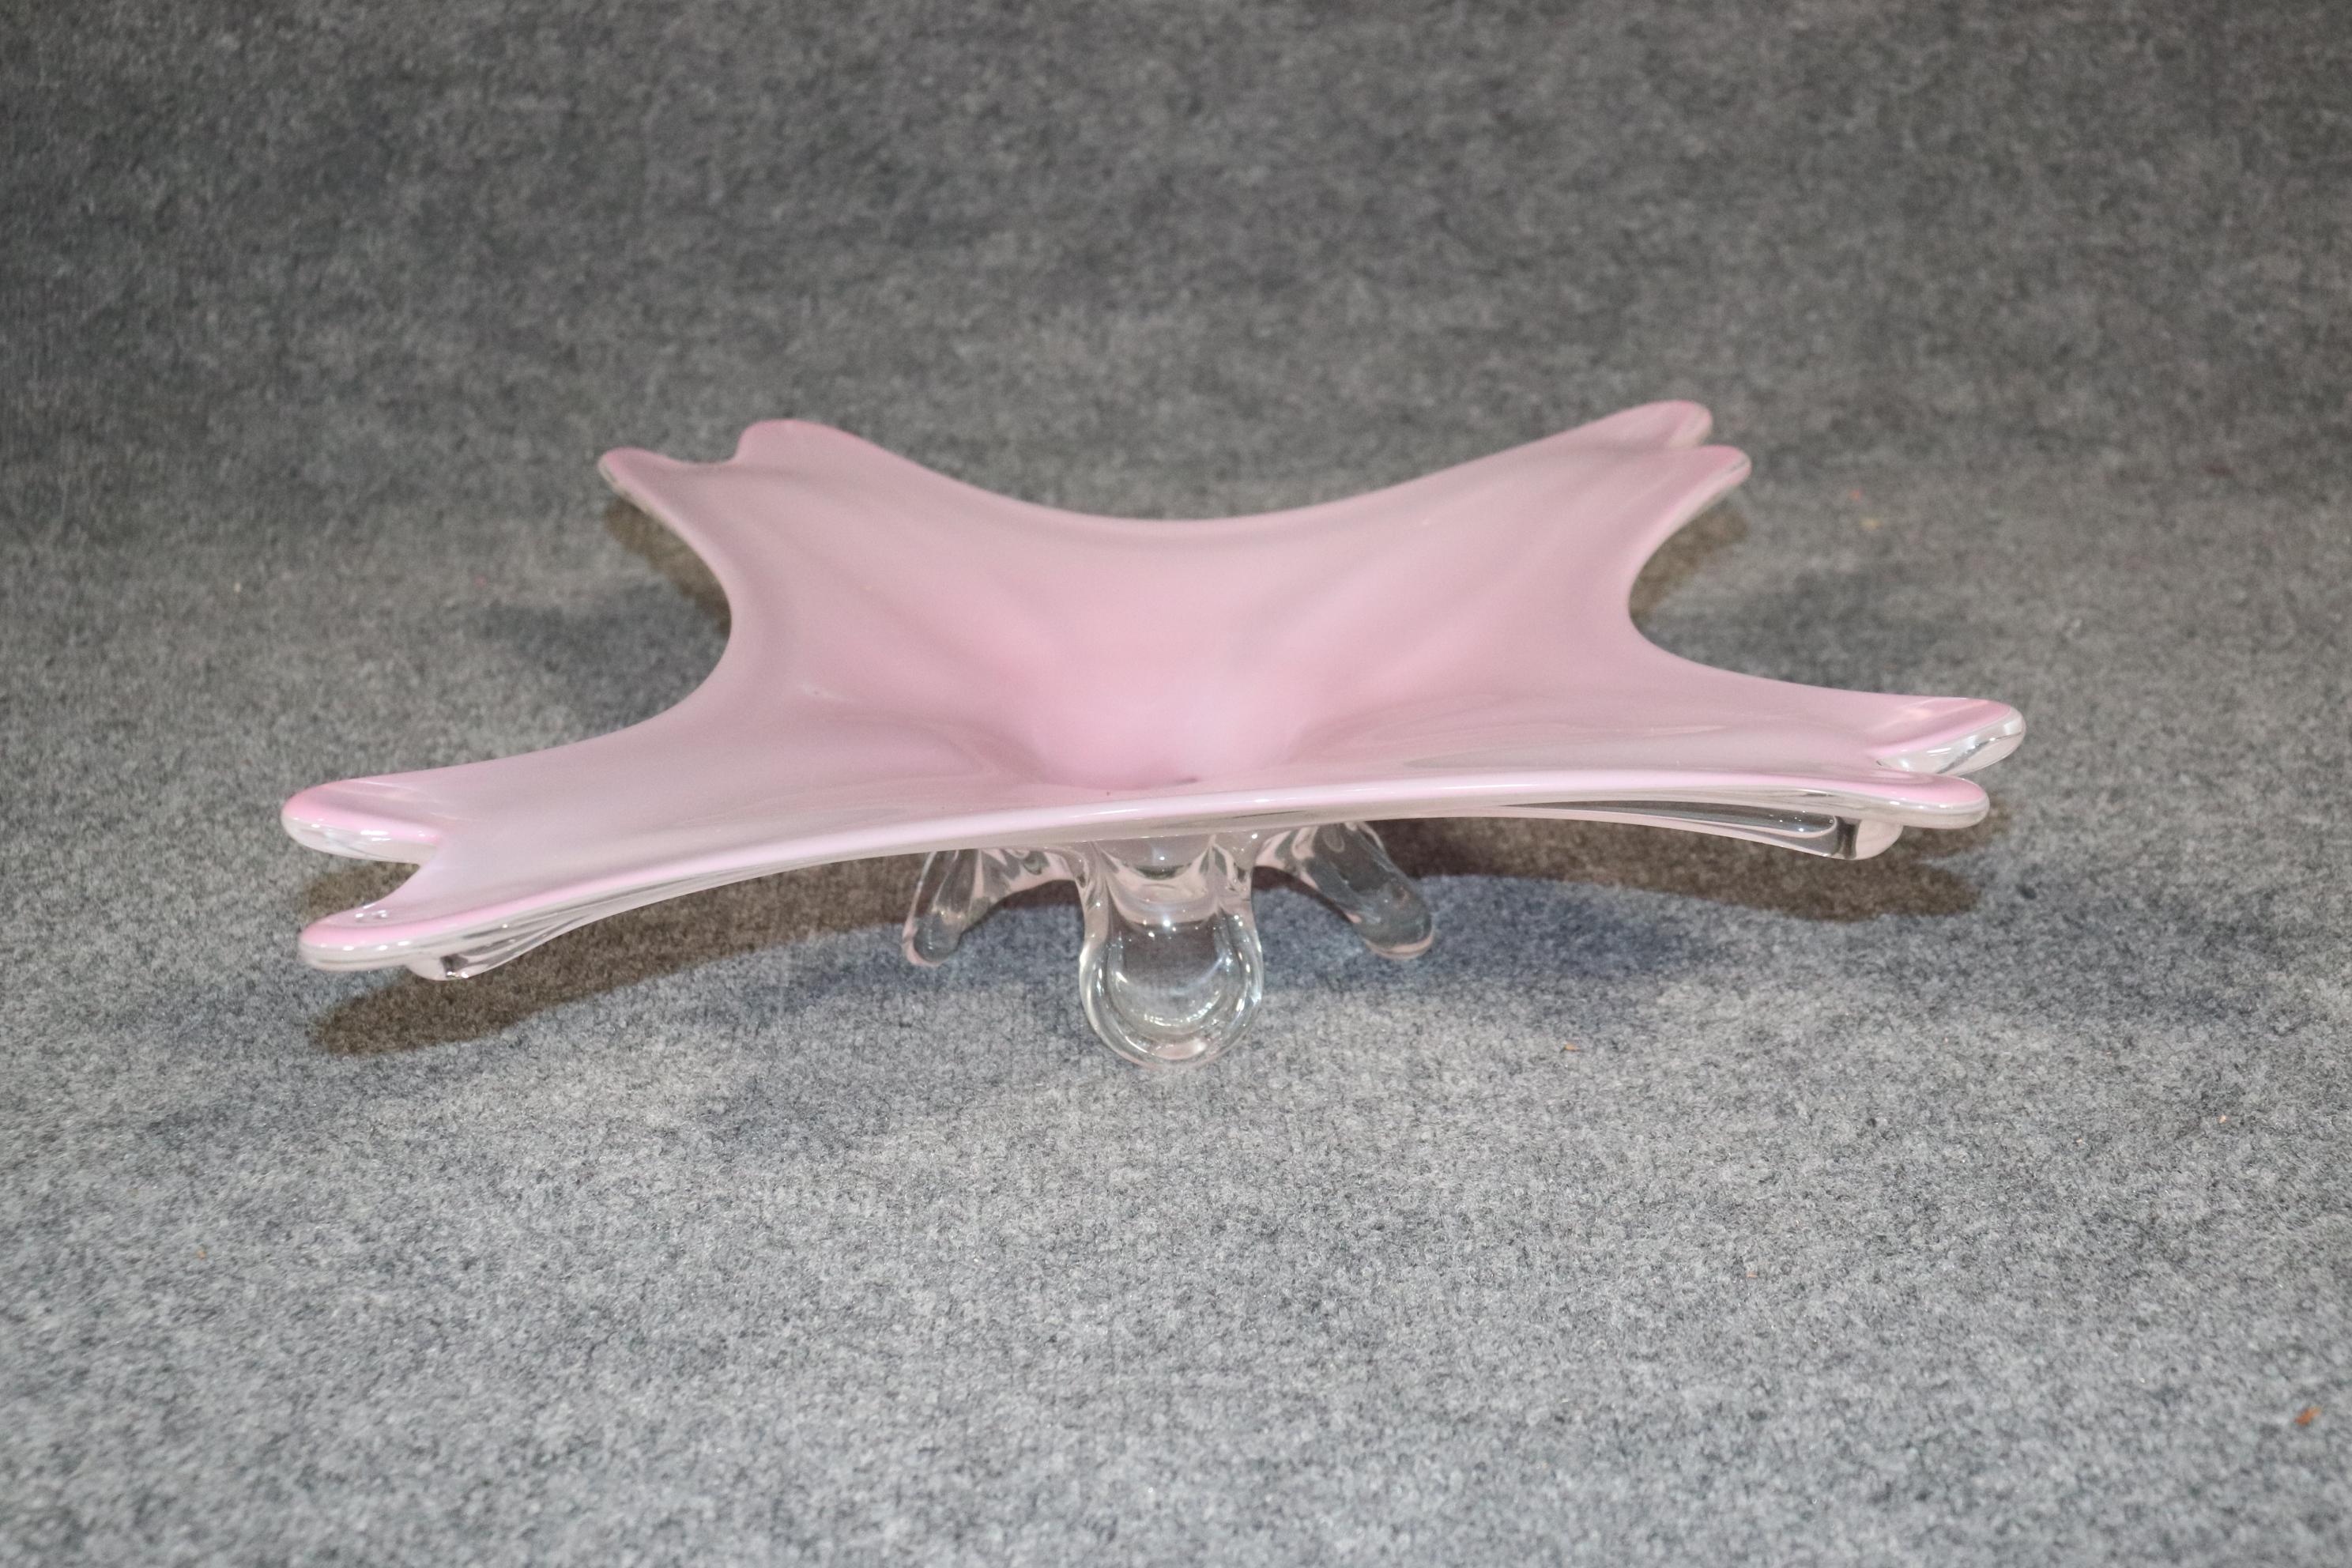 Dimensions: H: 5 1/4in W: 20 1/2in D: 16 1/2in
This is an Incredible example of some of the fine work that Murano Produced. The size and colors of this piece make it a rare commodity. This Centerpiece or tray will look great in any Home or office